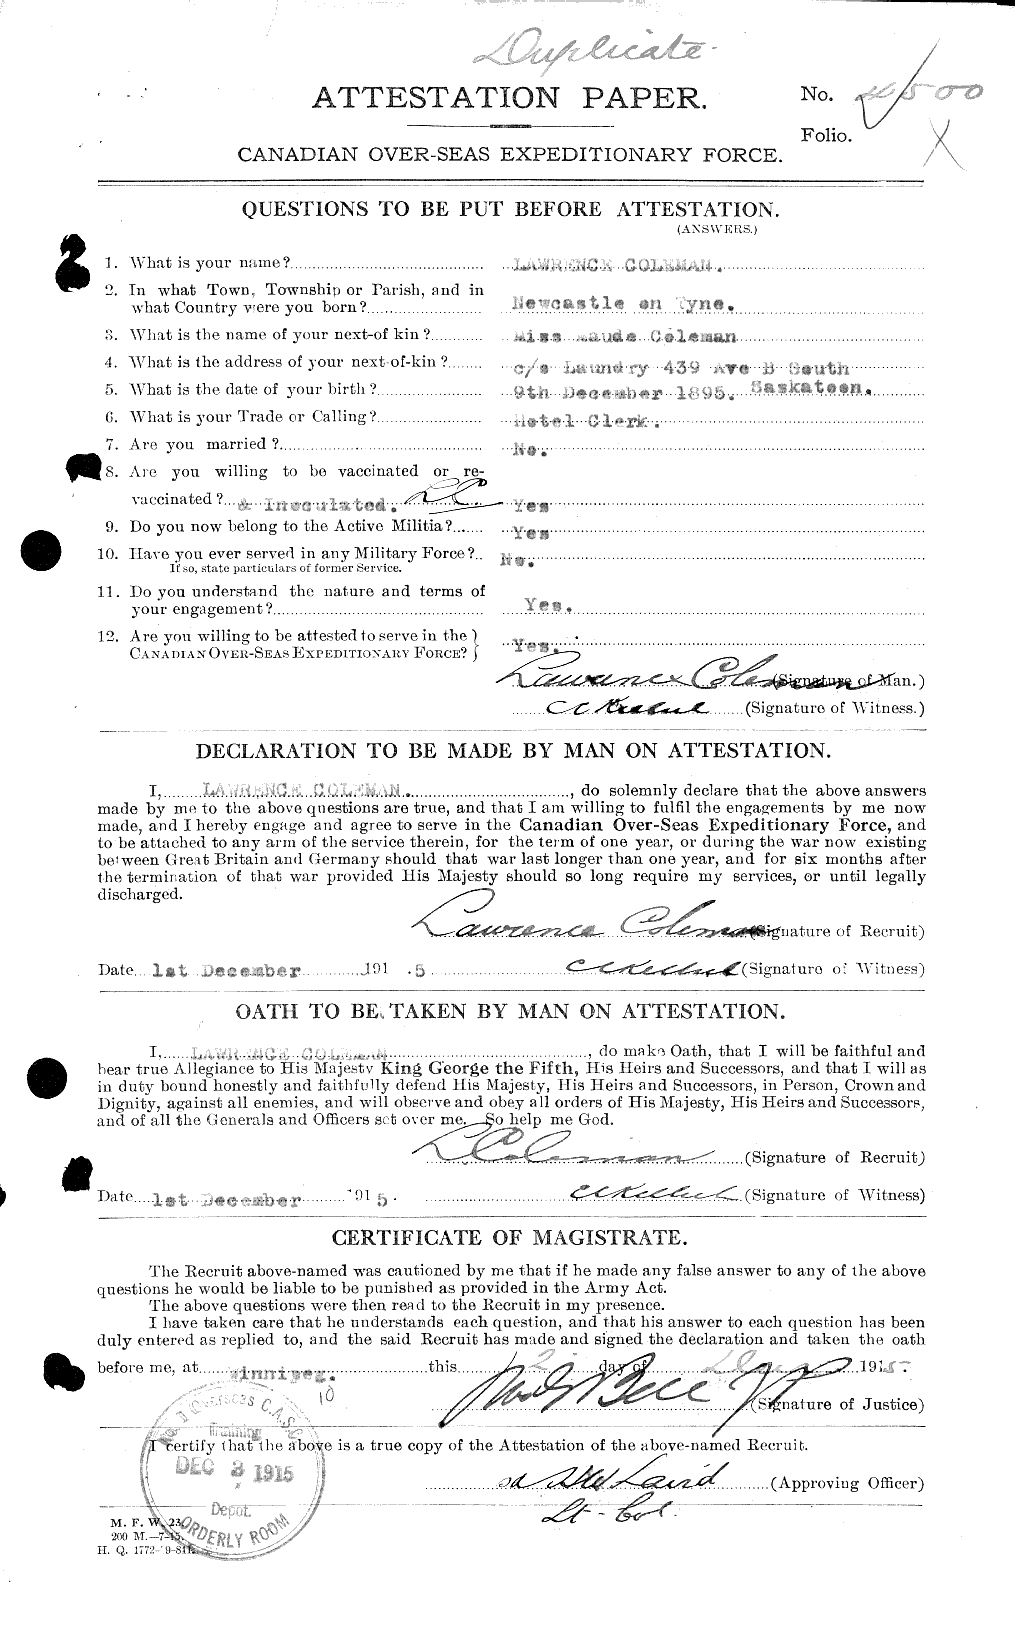 Personnel Records of the First World War - CEF 028227a